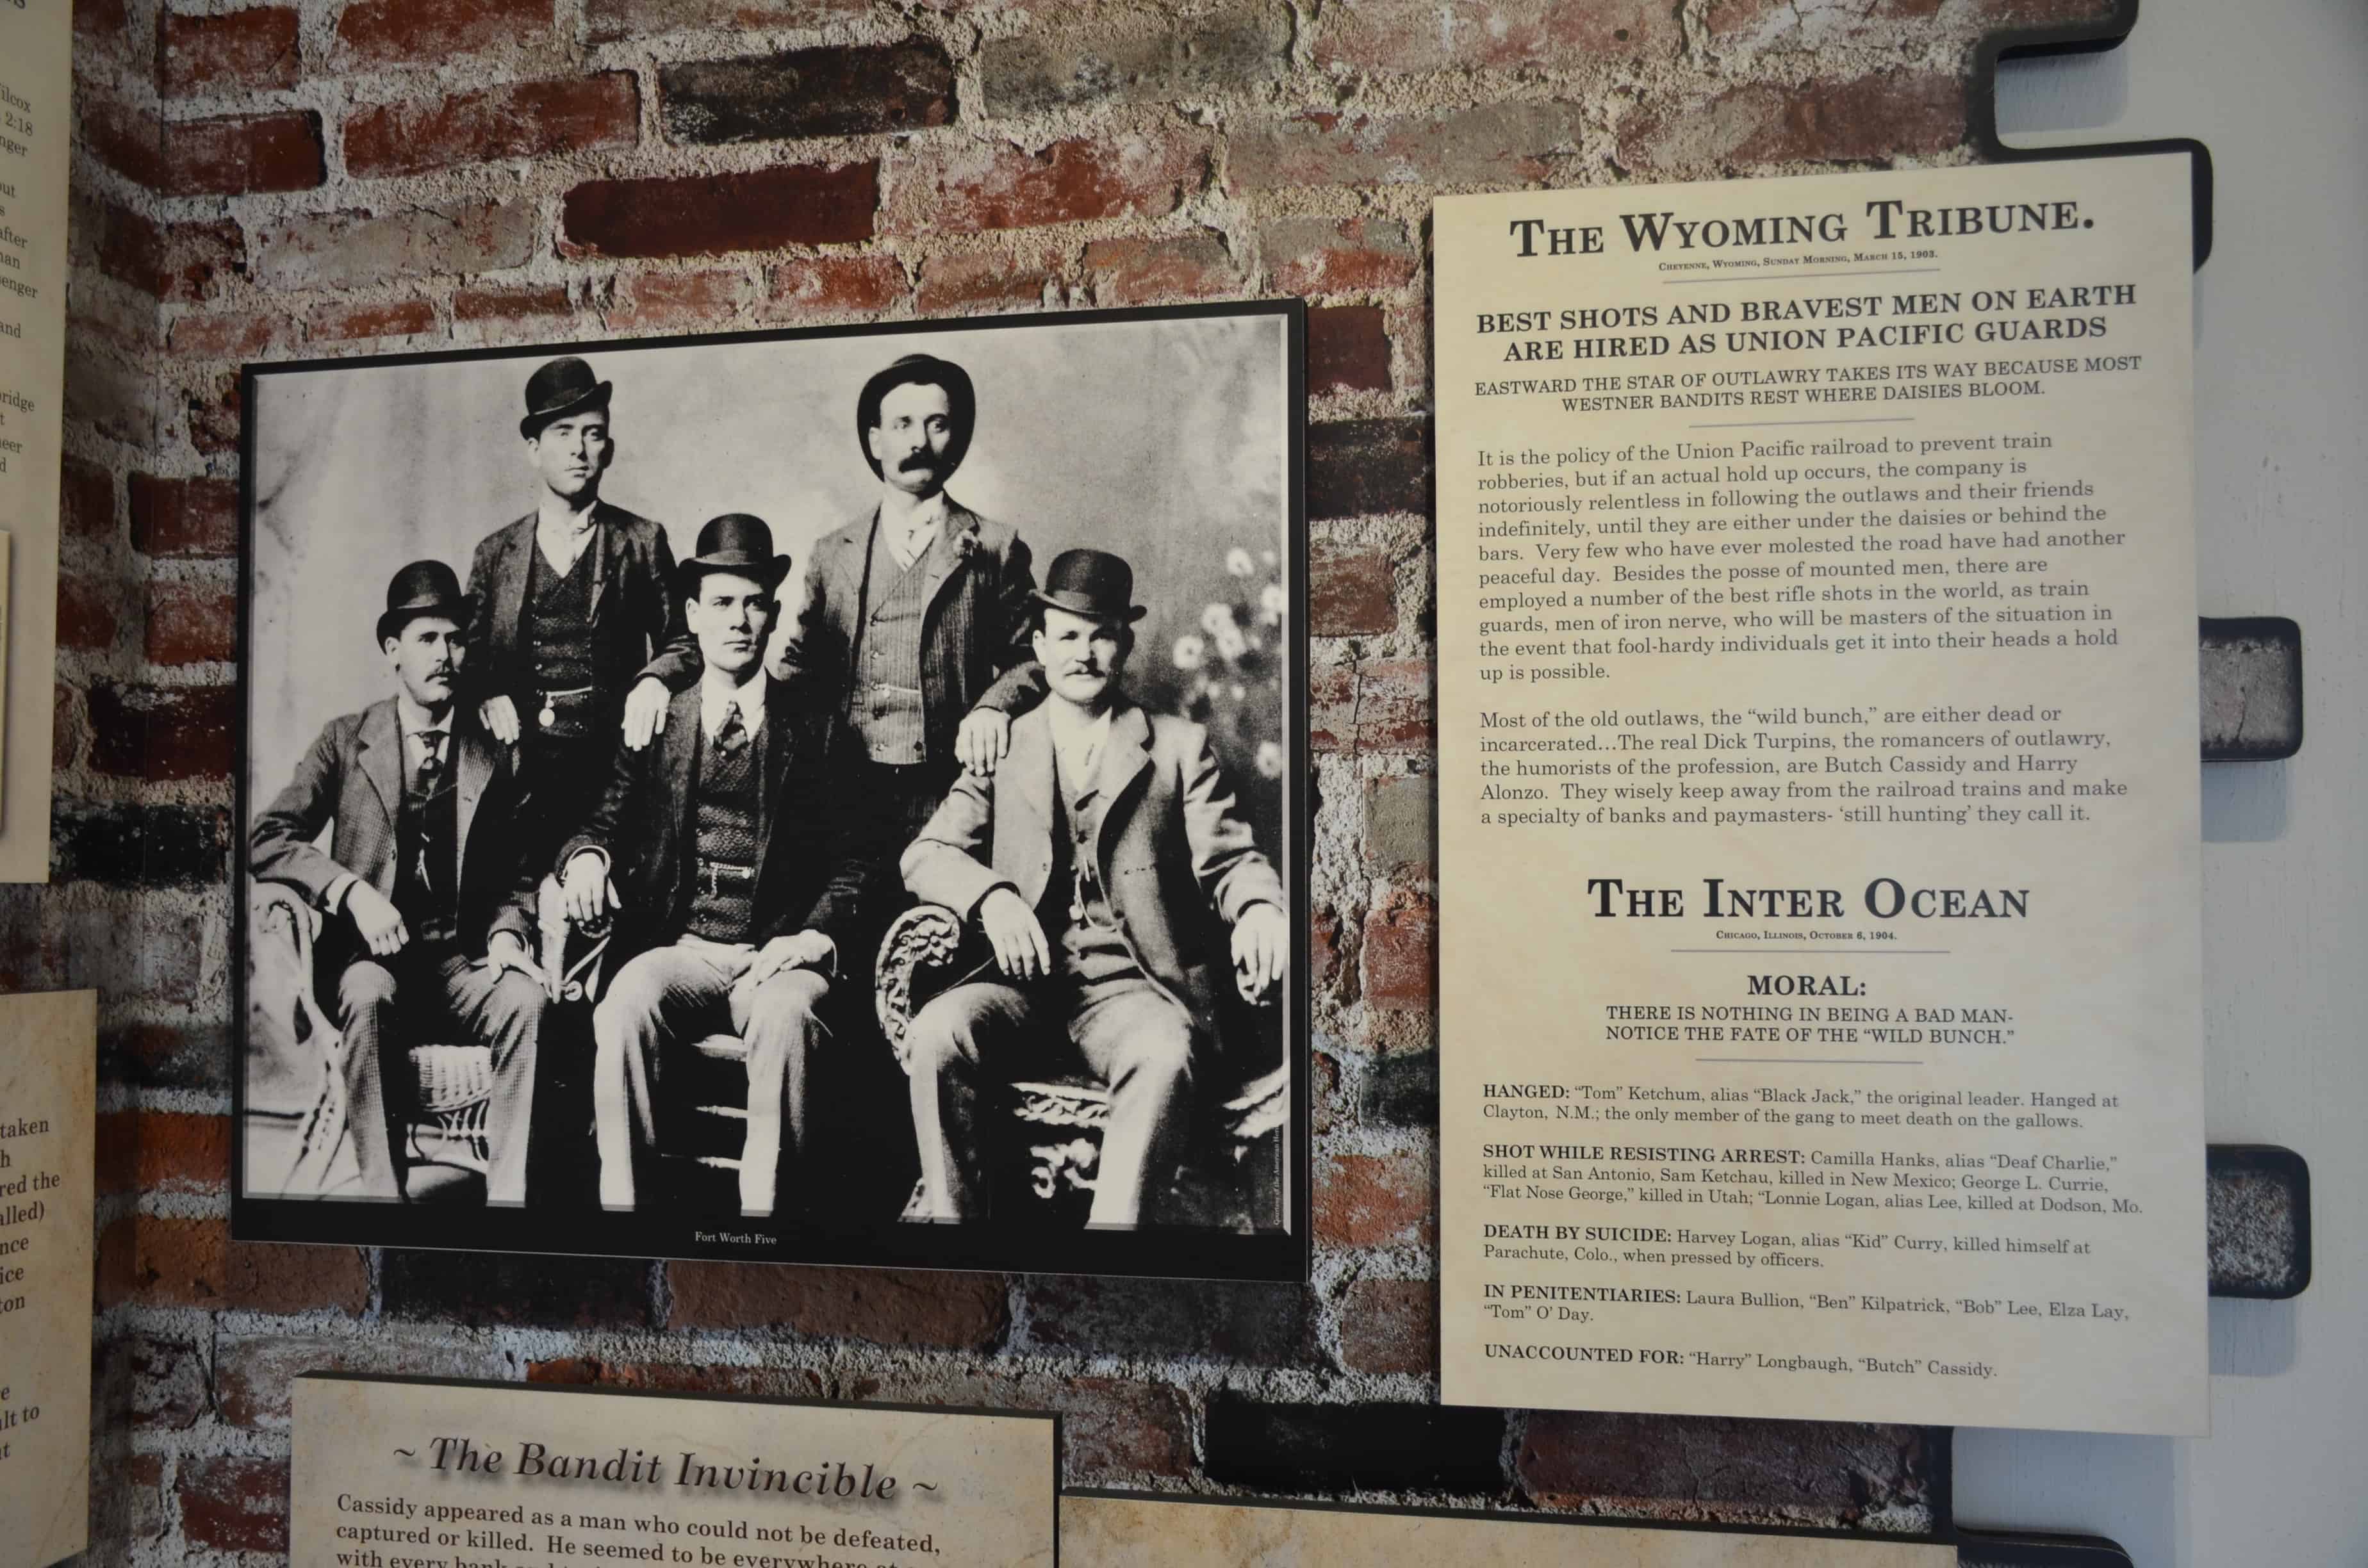 Butch Cassidy exhibit at Wyoming Territorial Prison State Historic Site in Laramie